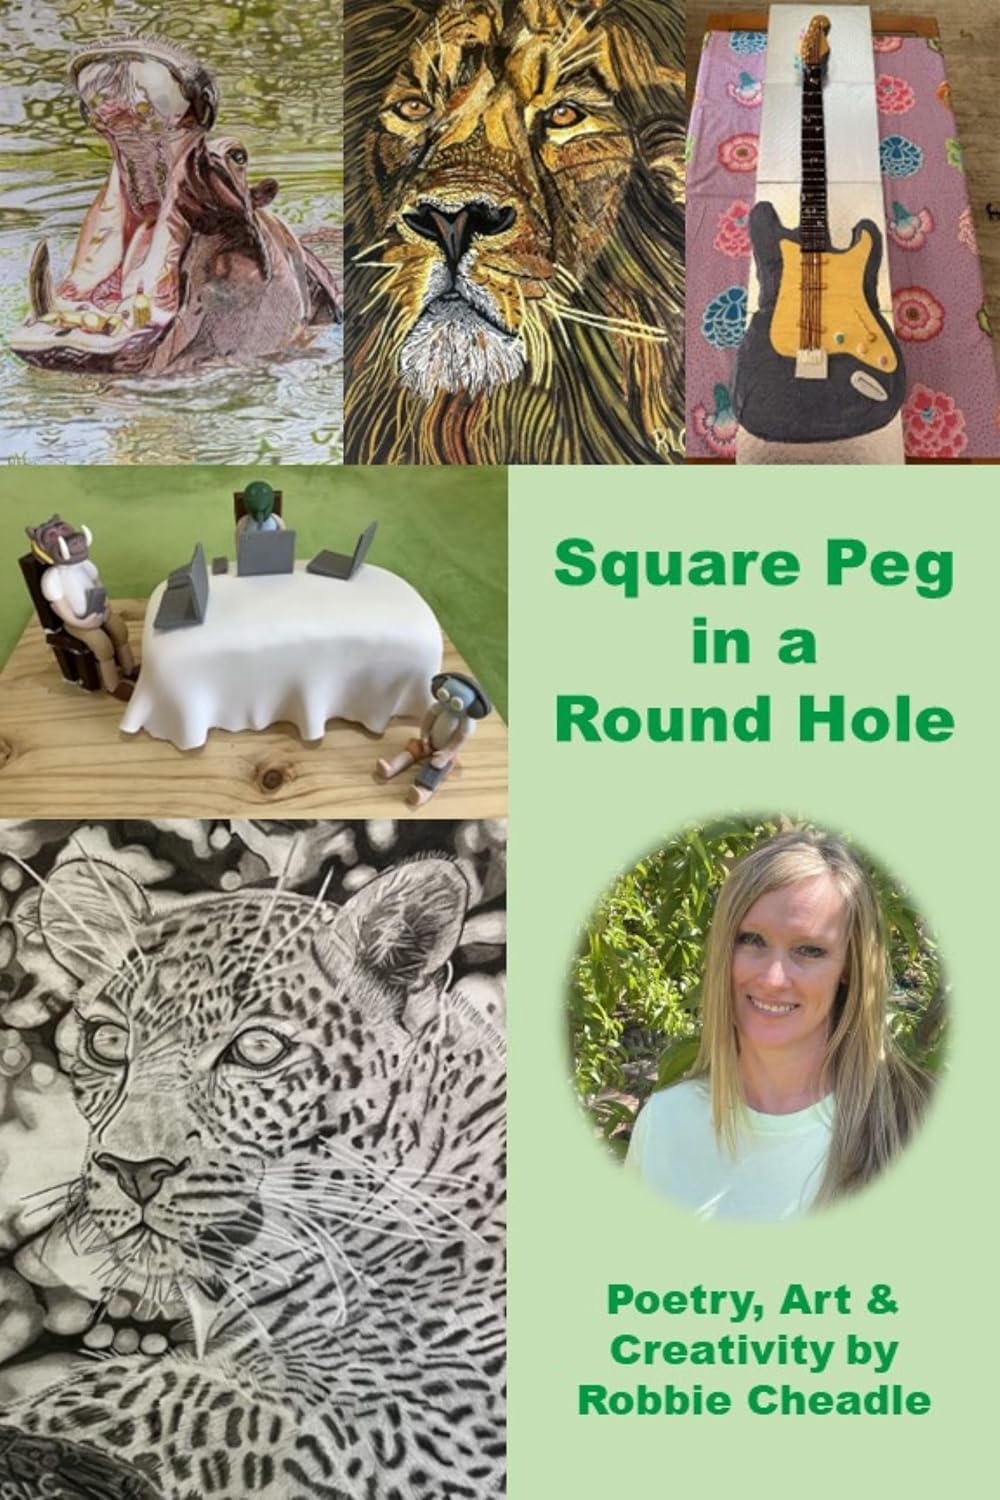 Book Review: Square Peg in a Round Hole, by Robbie Cheadle & Michael Cheadle